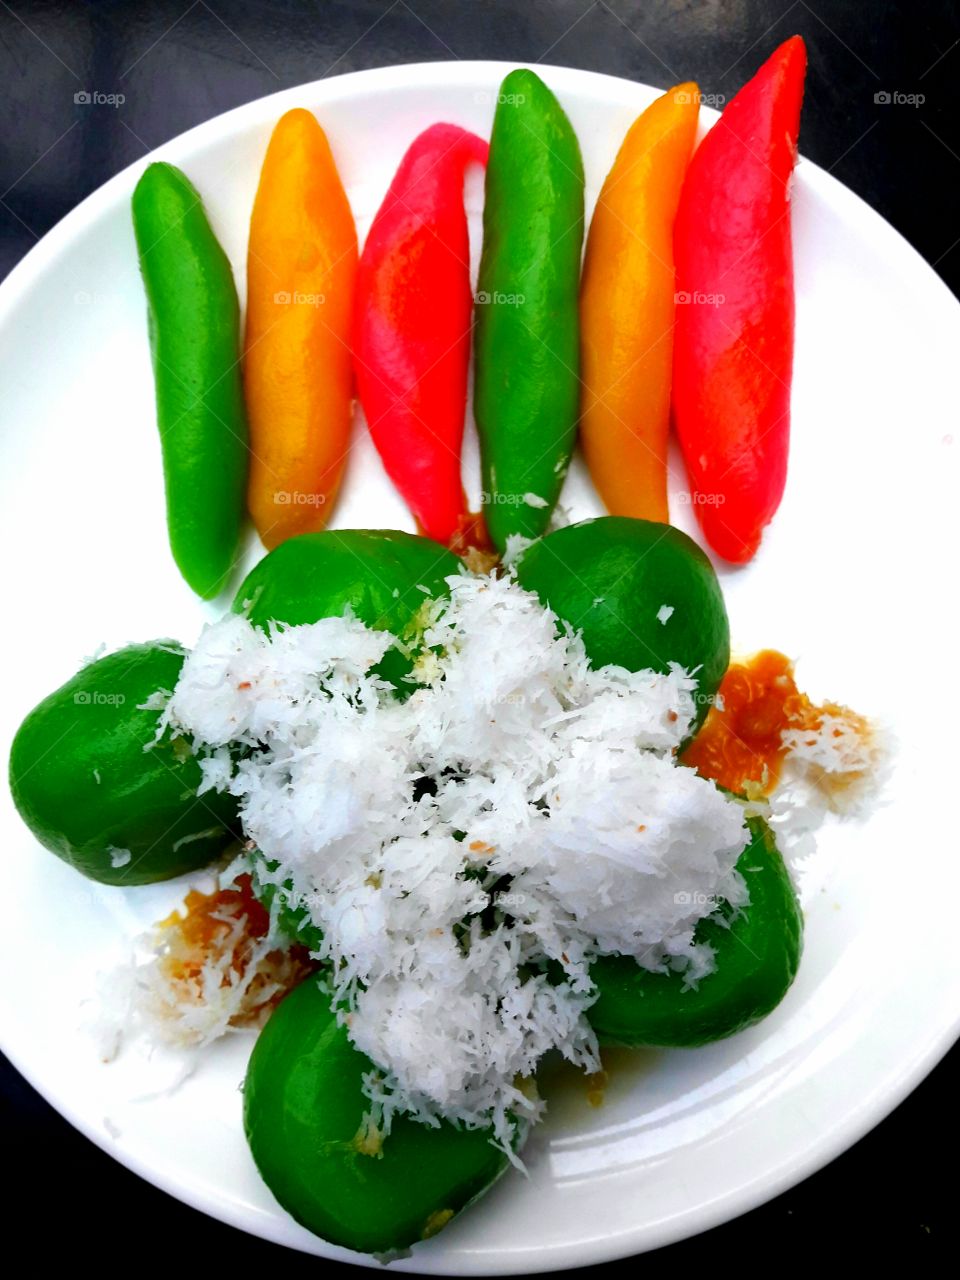 Klanting and Klepon...Klanting and Klepon are Javanese traditional food served with melted brown sugar sauce and shreded coconut